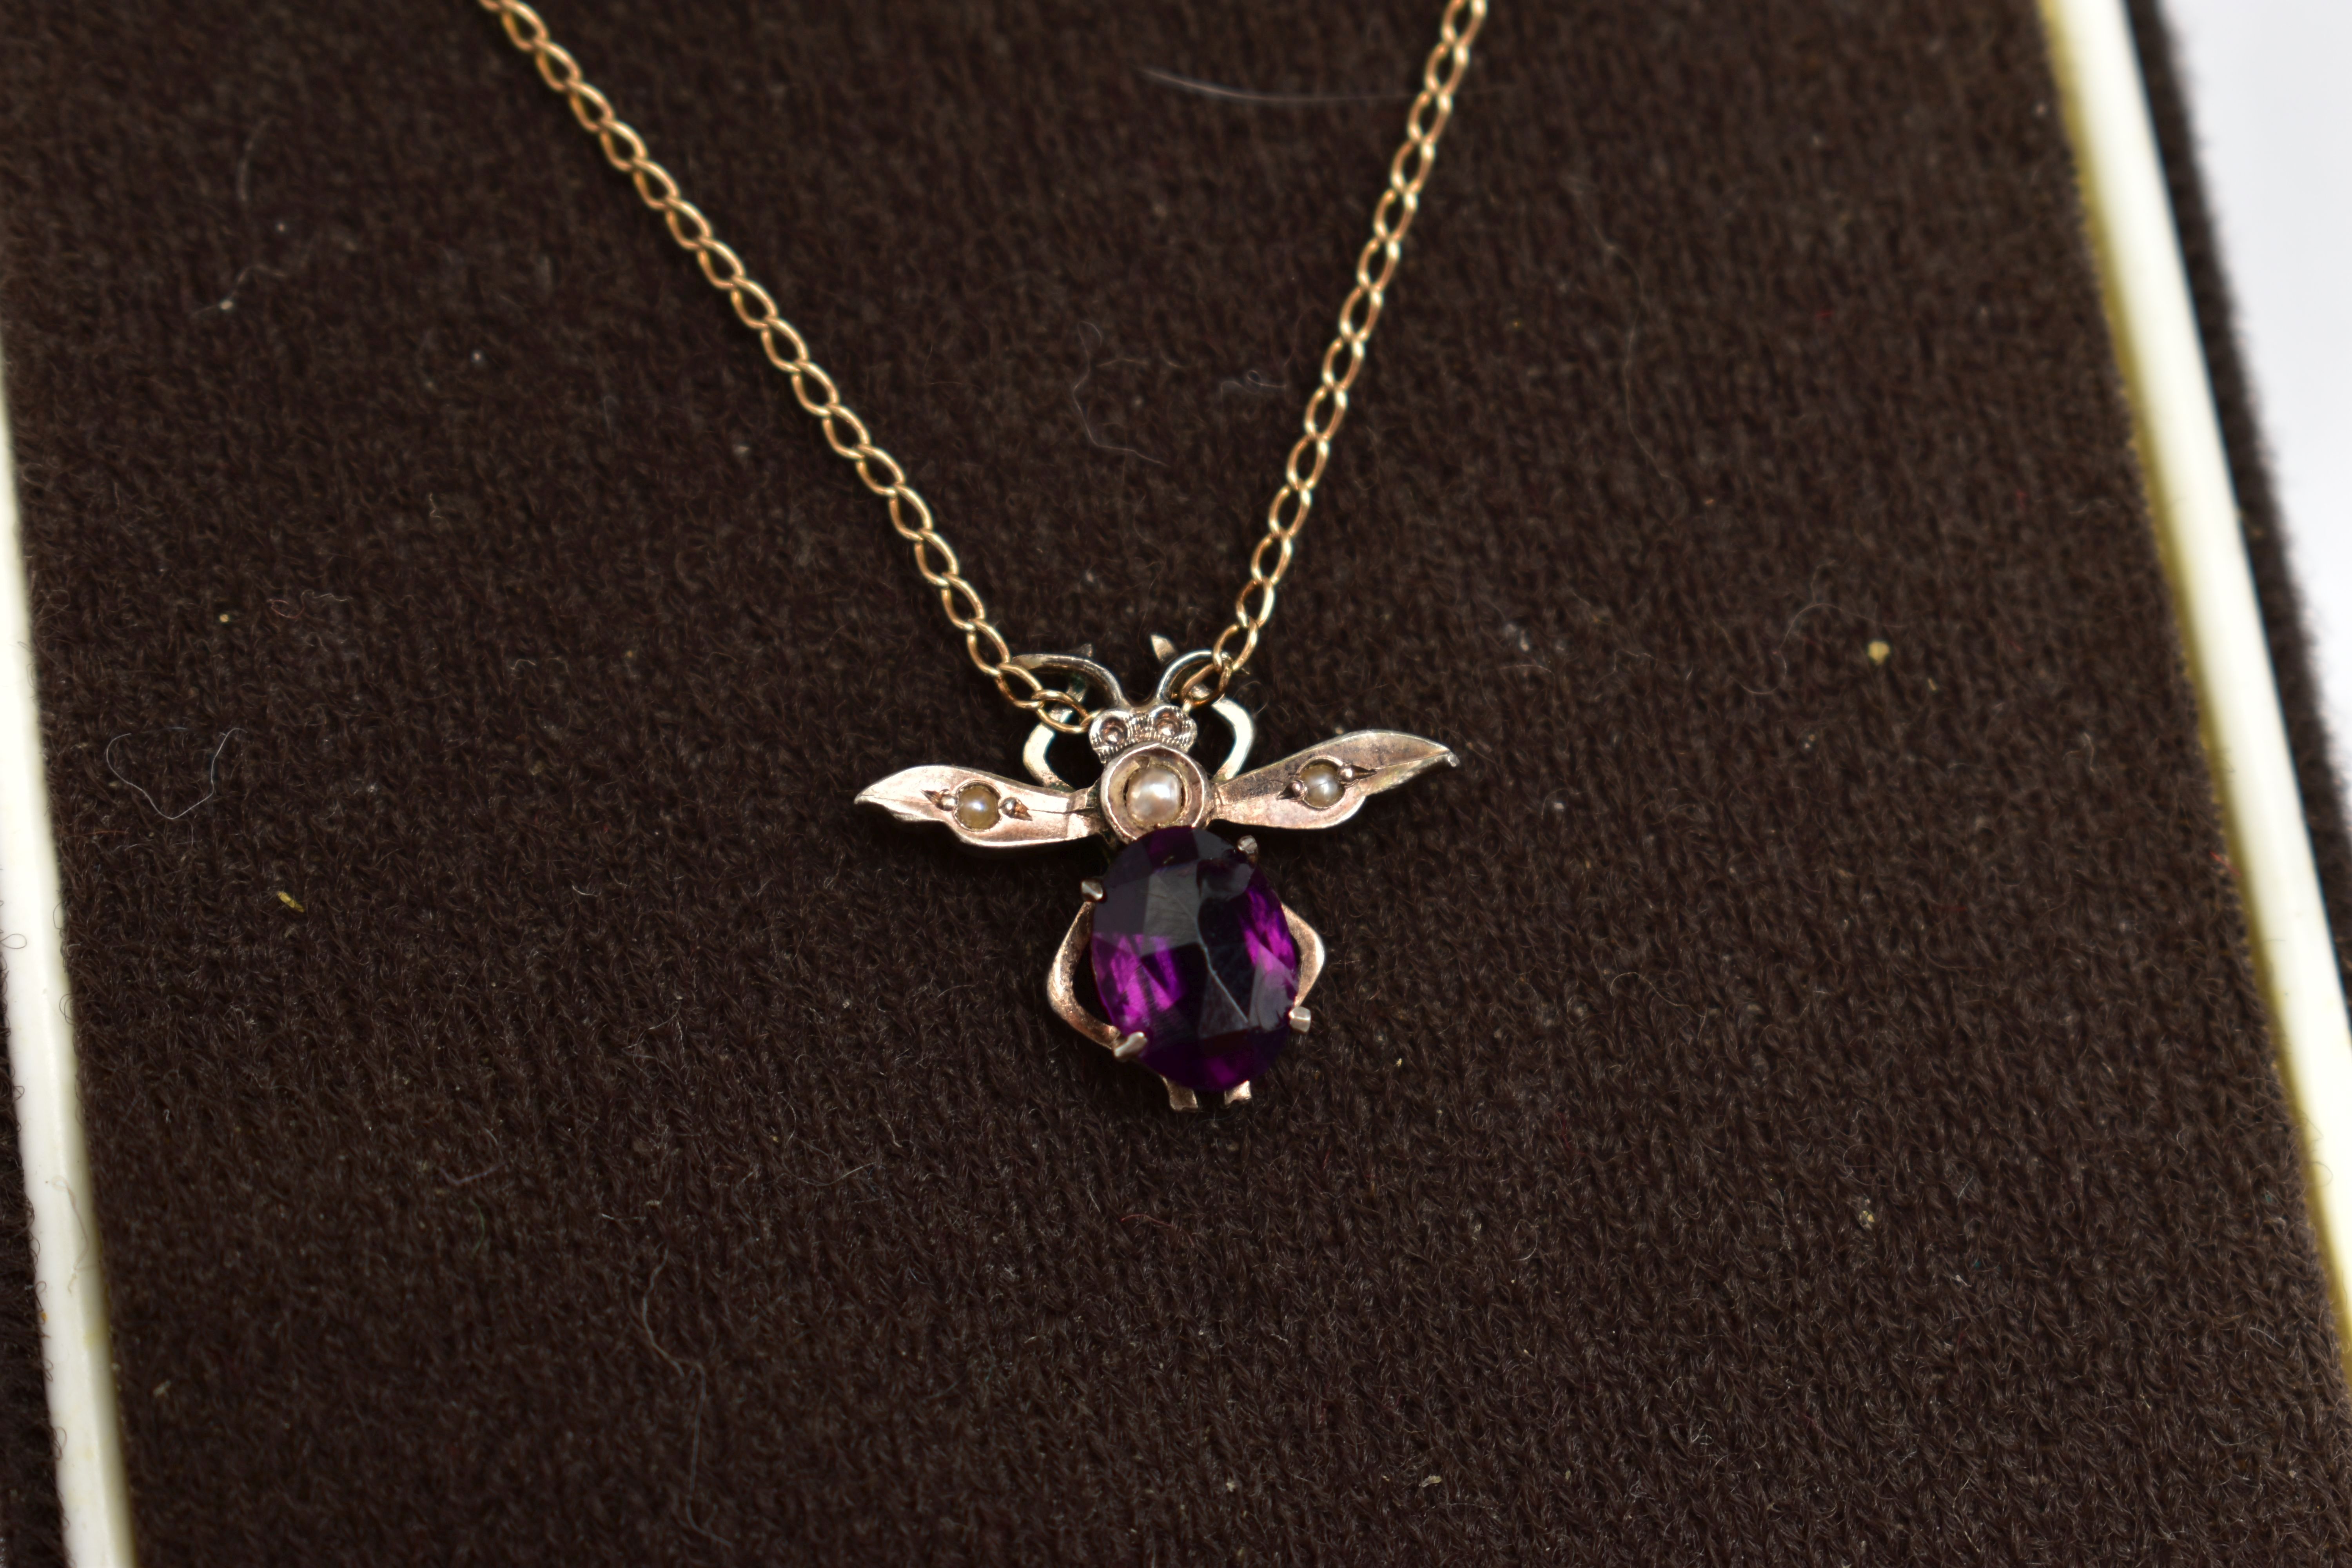 A 9CT YELLOW GOLD SAPPHIRE AND DIAMOND NECKLACE AND EARRING SET, TOGETHER WITH A PASTE BUG PENDANT - Image 3 of 3